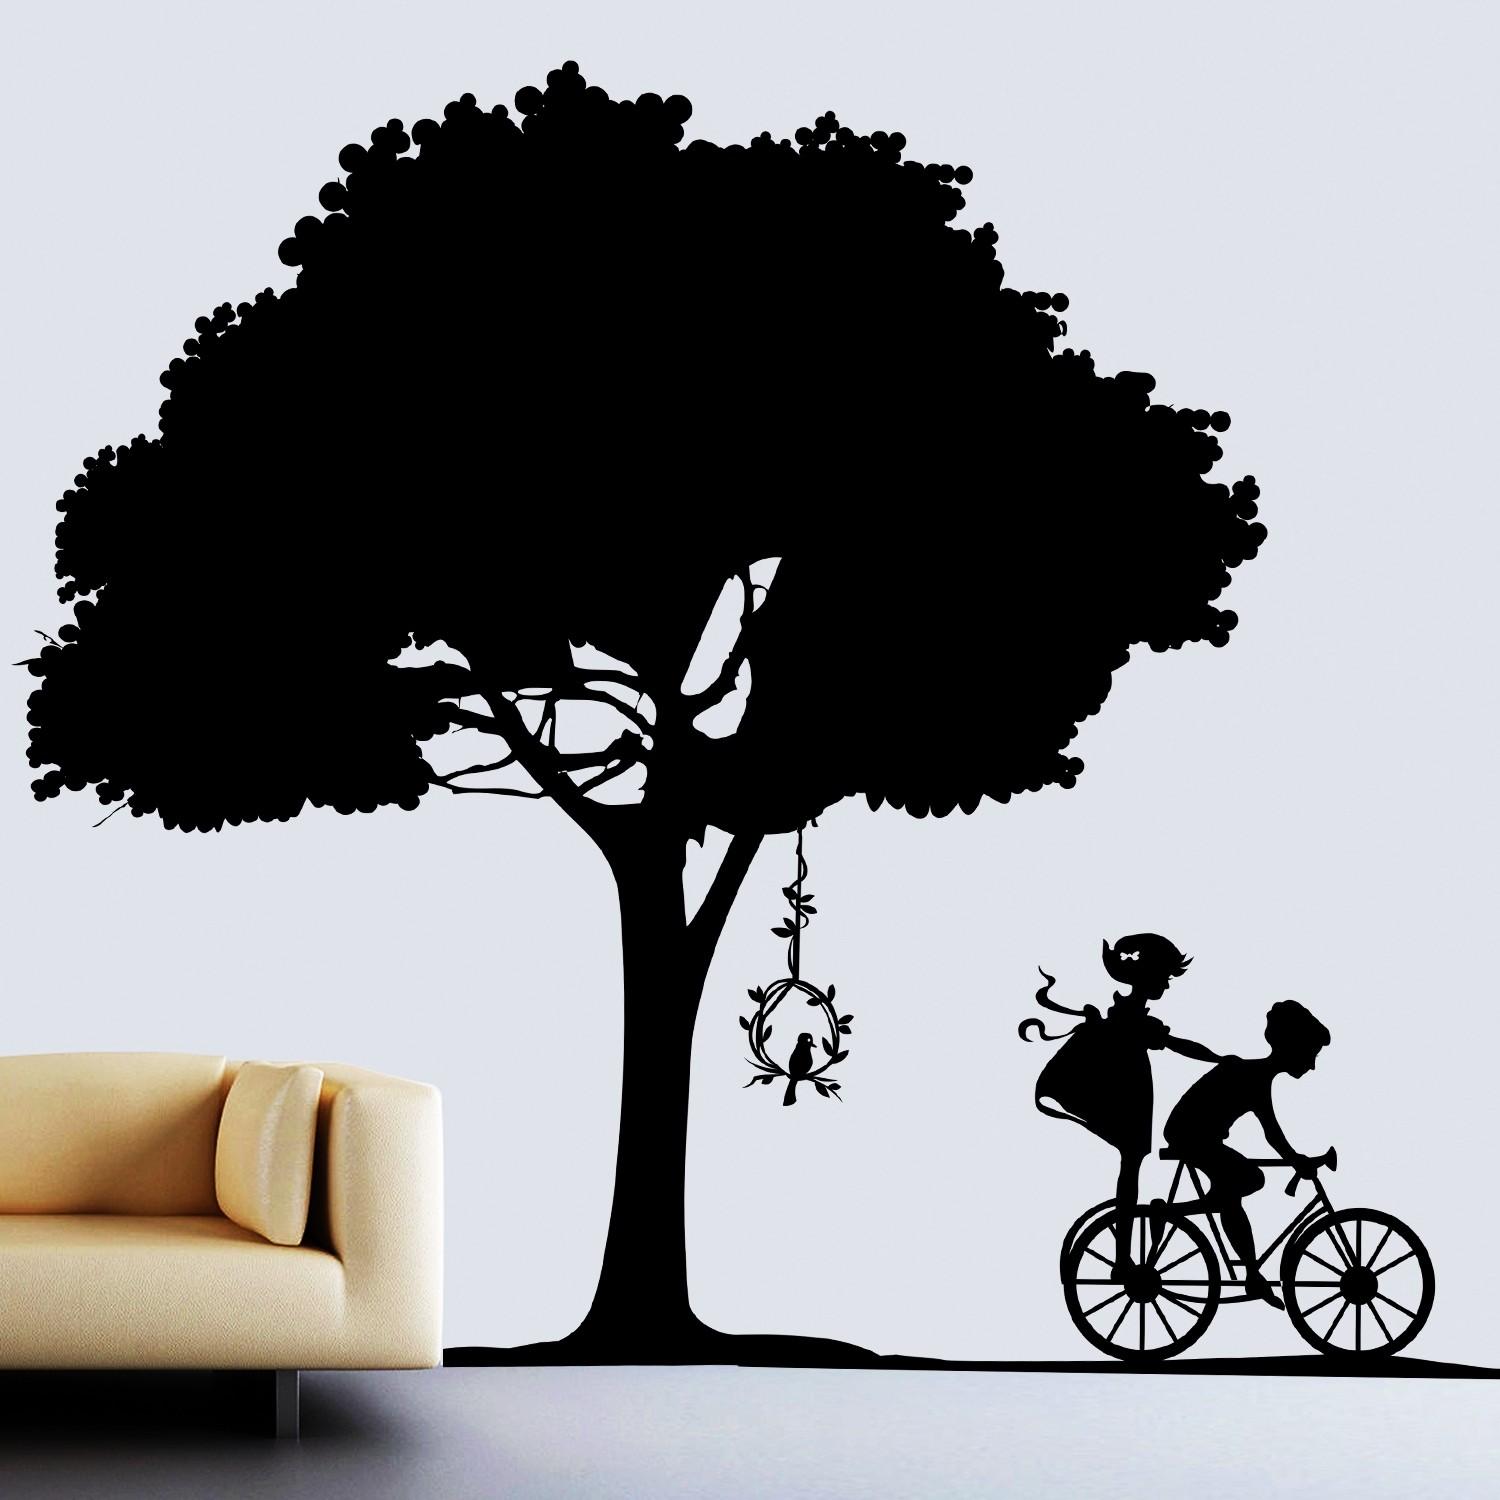 Kids Playing Under Tree Wall Sticker Decal-Small-Black